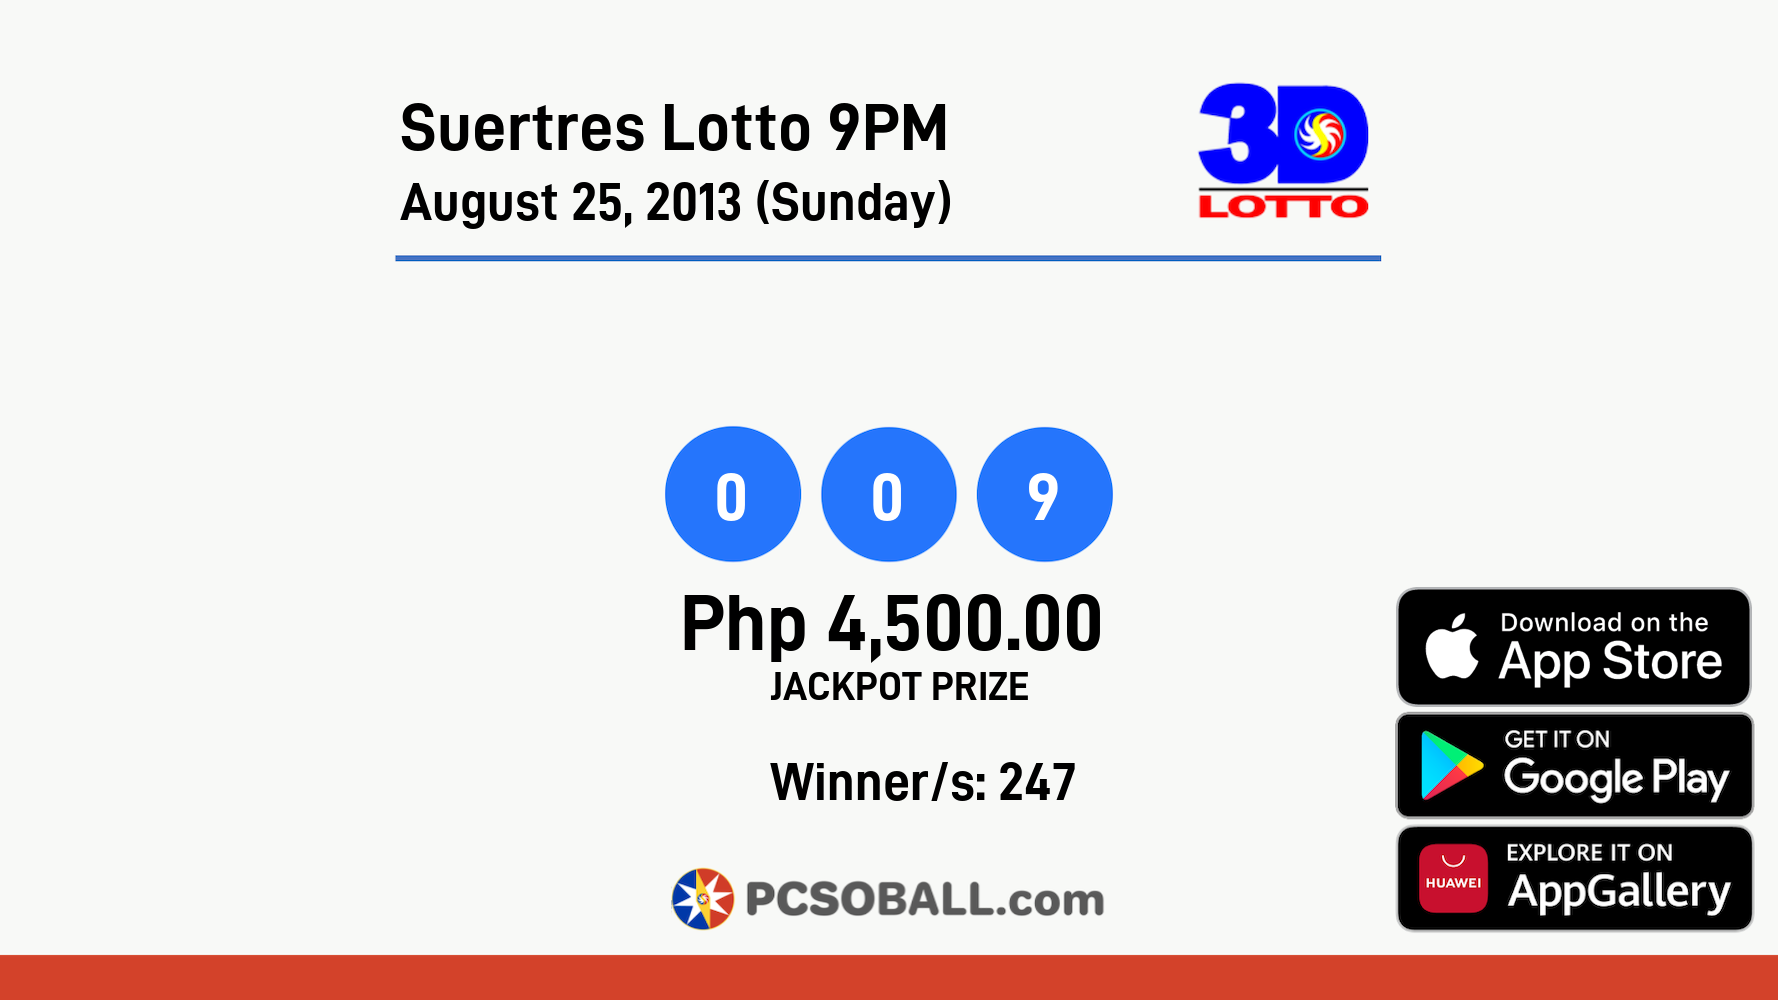 Suertres Lotto 9PM August 25, 2013 (Sunday) Result